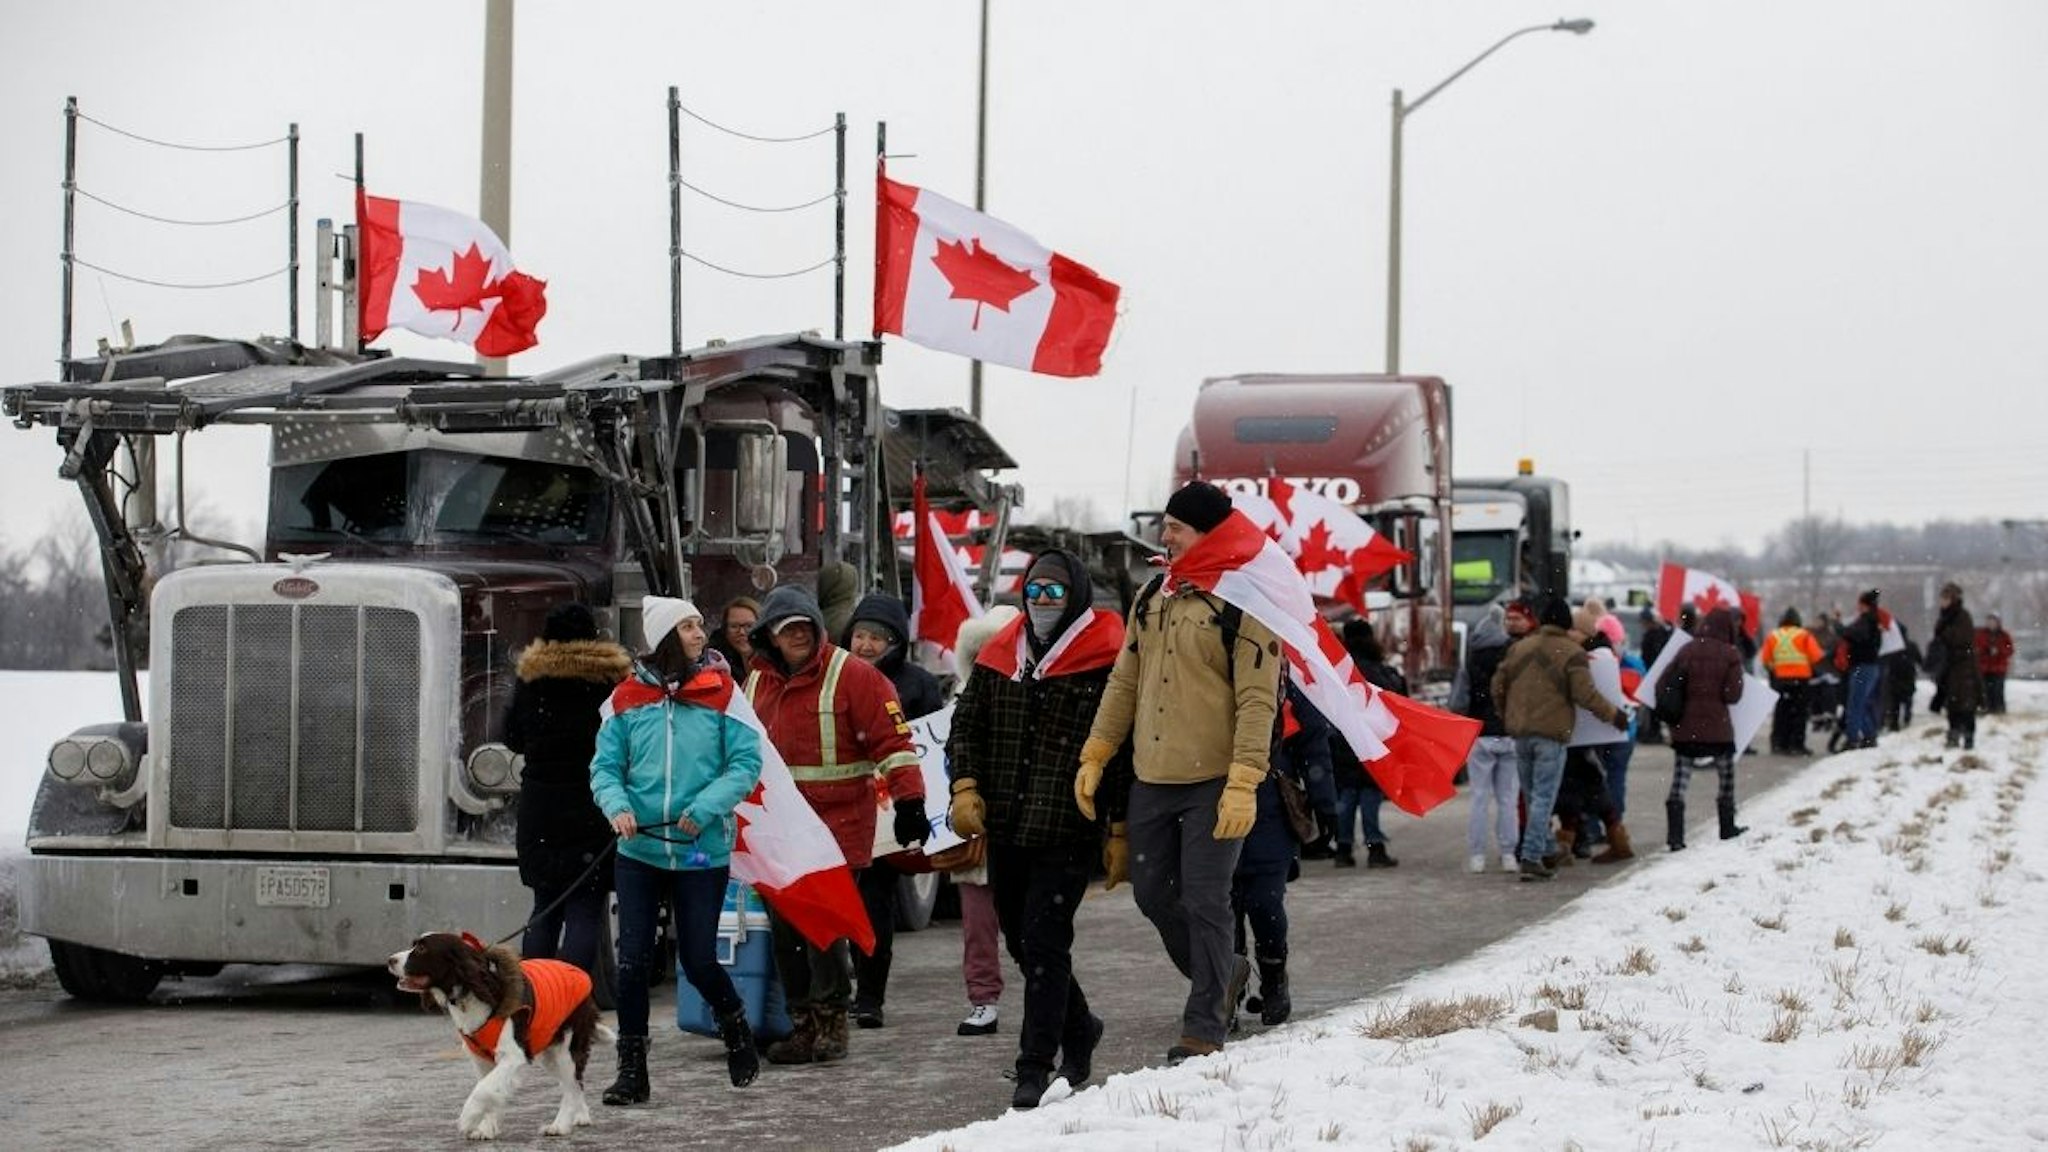 Supporters for a convoy of truckers driving from British Columbia to Ottawa in protest of a Covid-19 vaccine mandate for cross-border truckers, gather near a highway overpass outside of Toronto, Ontario, Canada, on January 27, 2022.